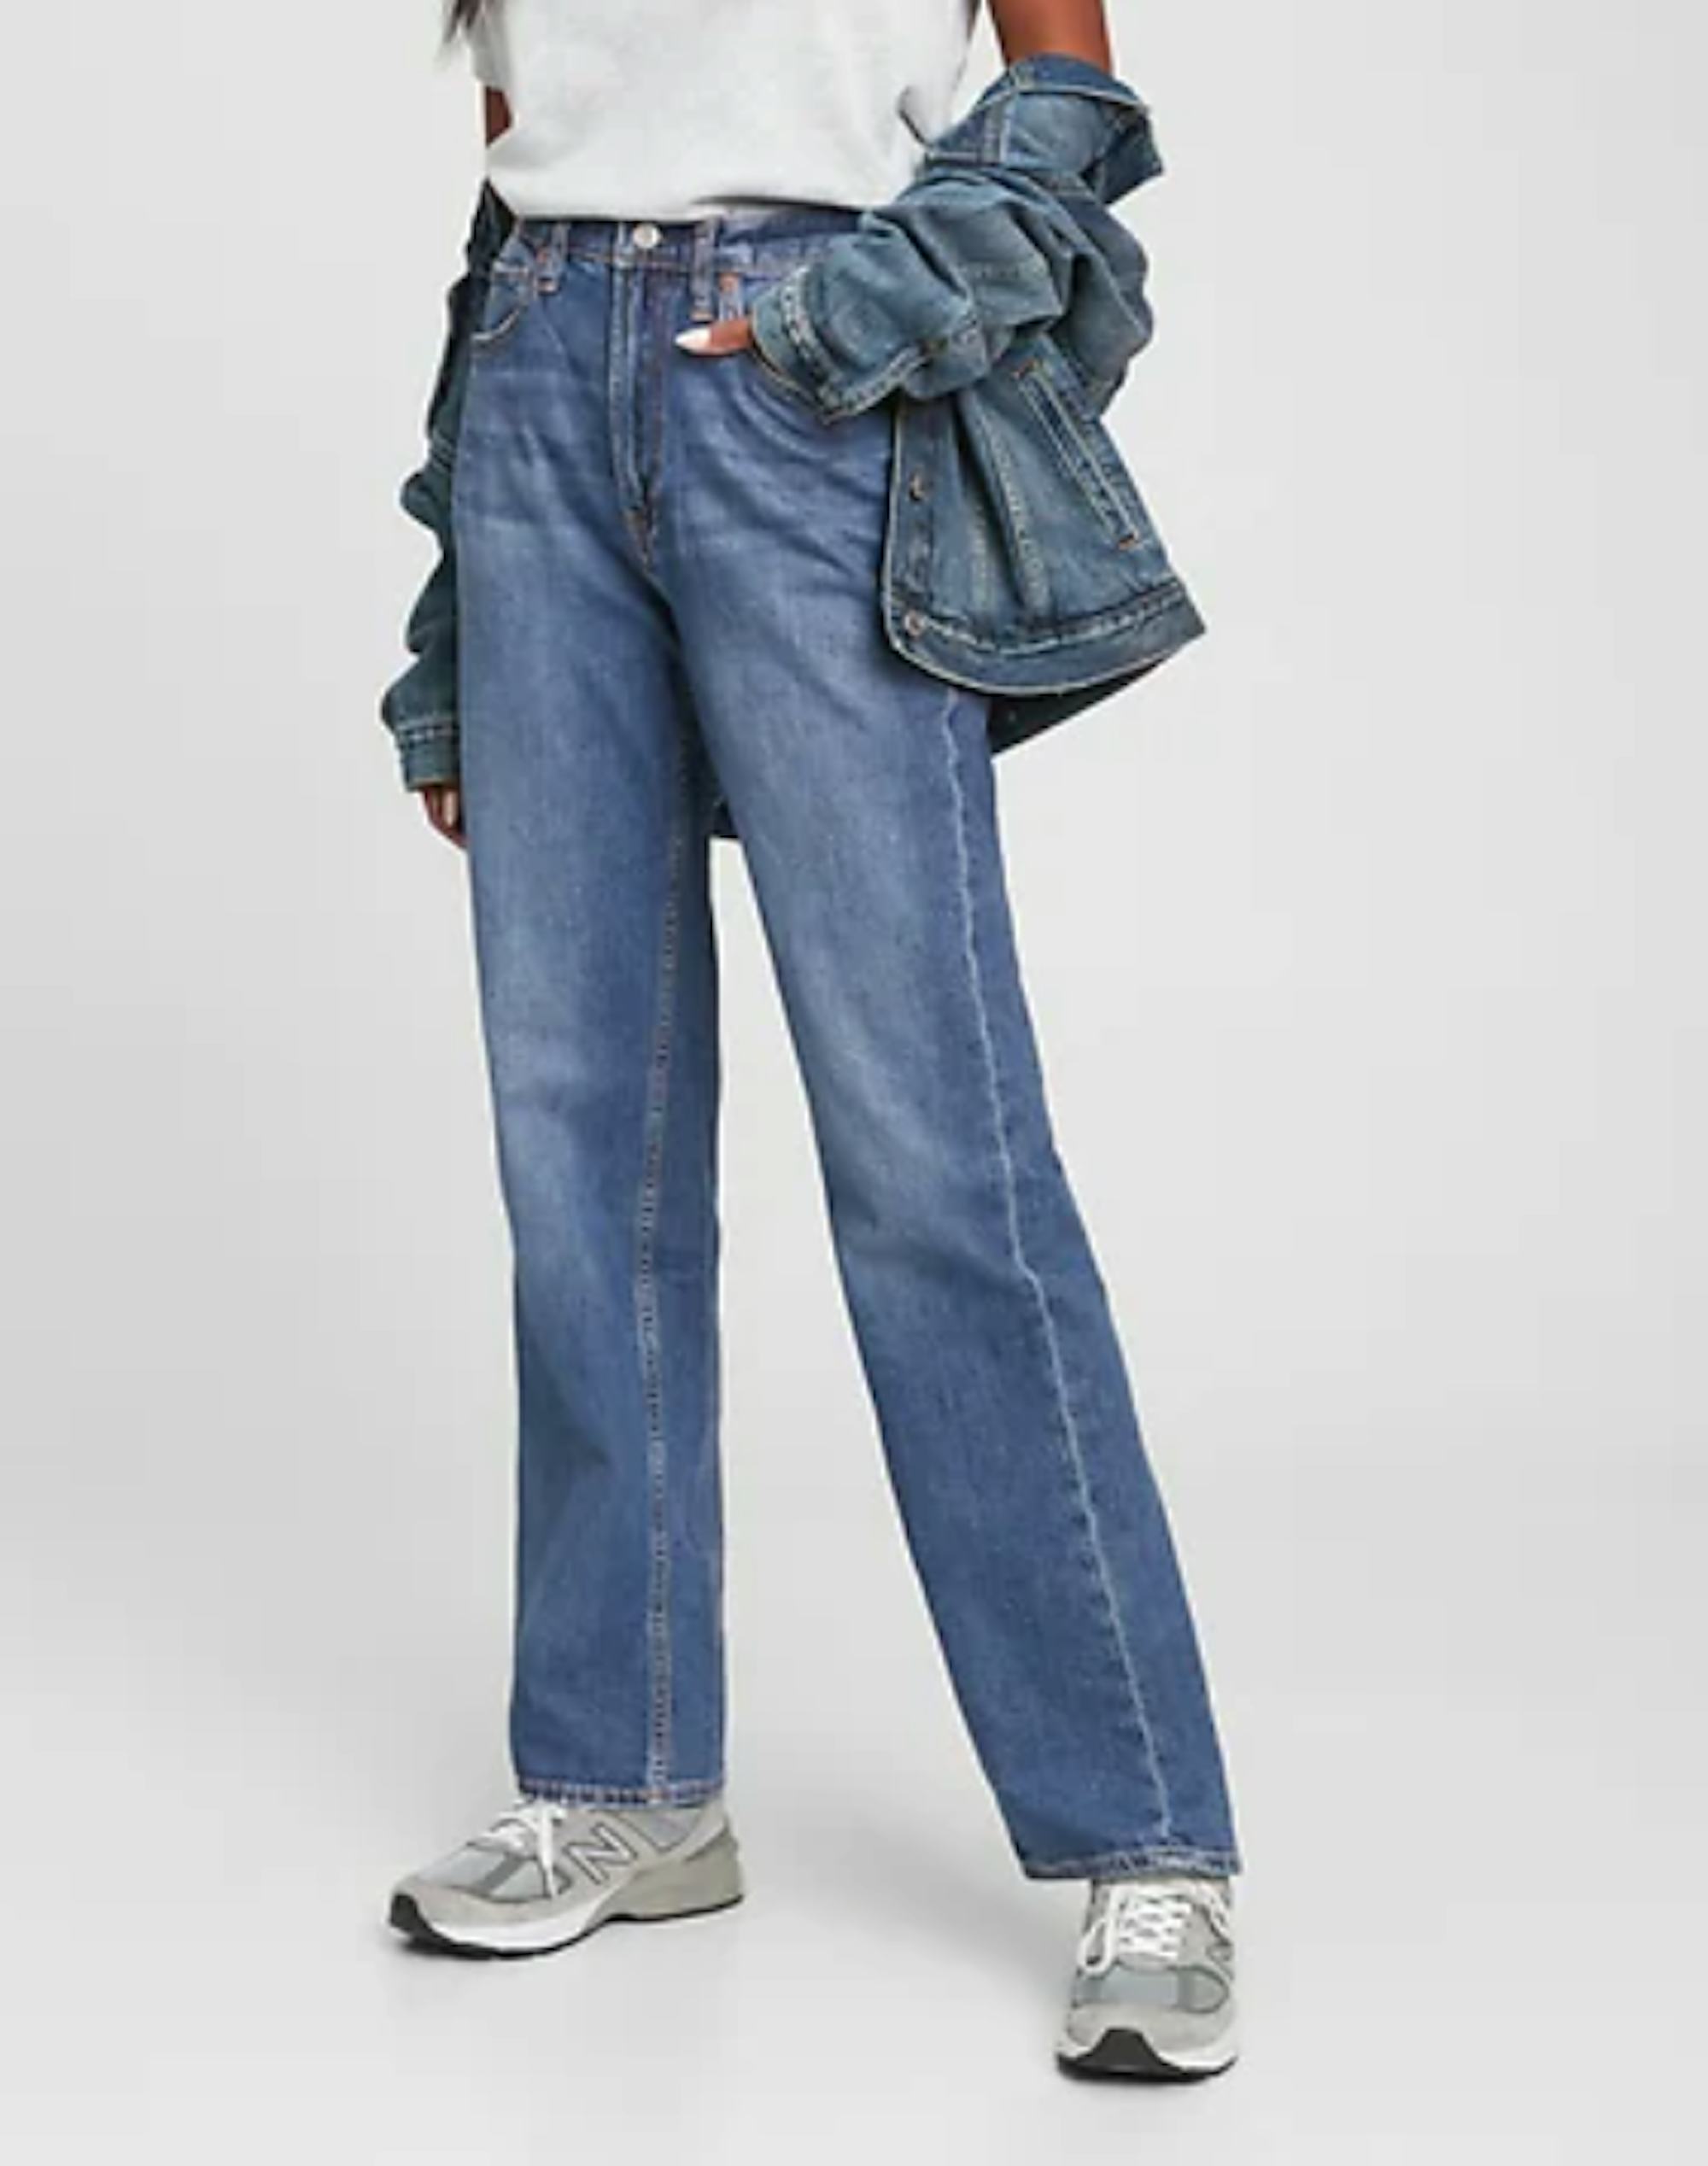 Spring 2022 Denim Trends Are All About Baggy, Cargo, & Low-Rise Jeans